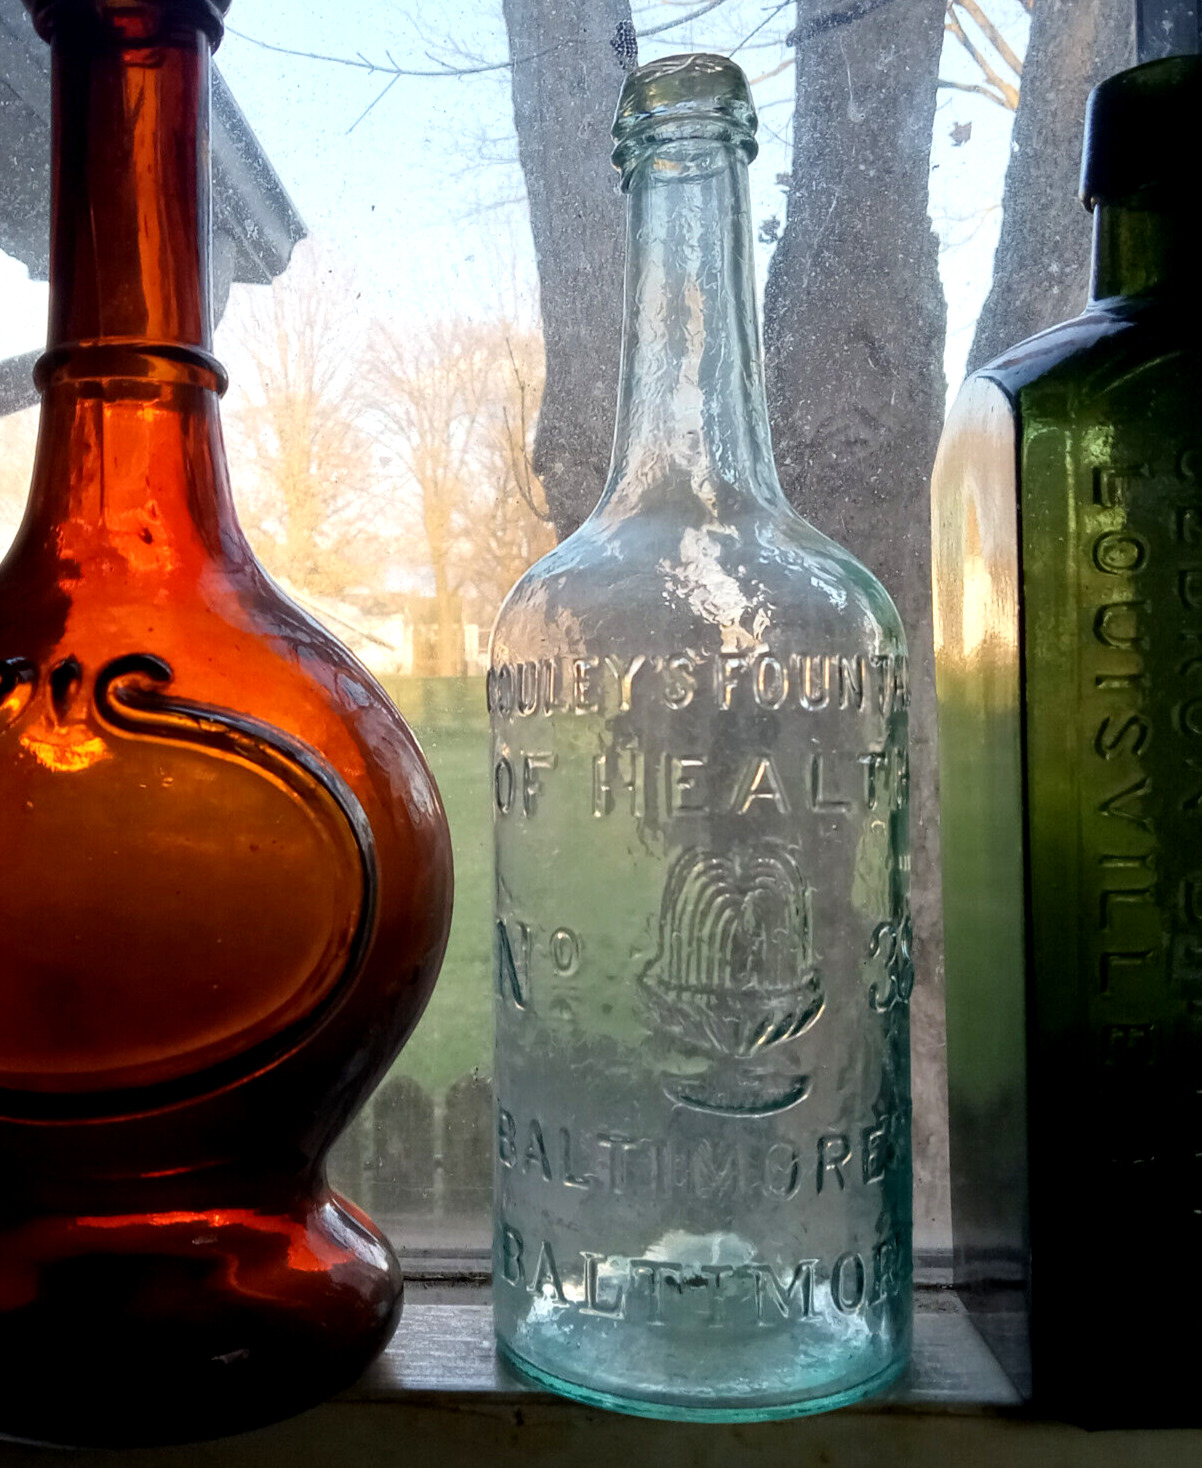 OPEN PONTIL GOULEY\'S FOUNTAIN OF HEALTH BALTIMORE RARE 1840s BITTERS BOTTLE